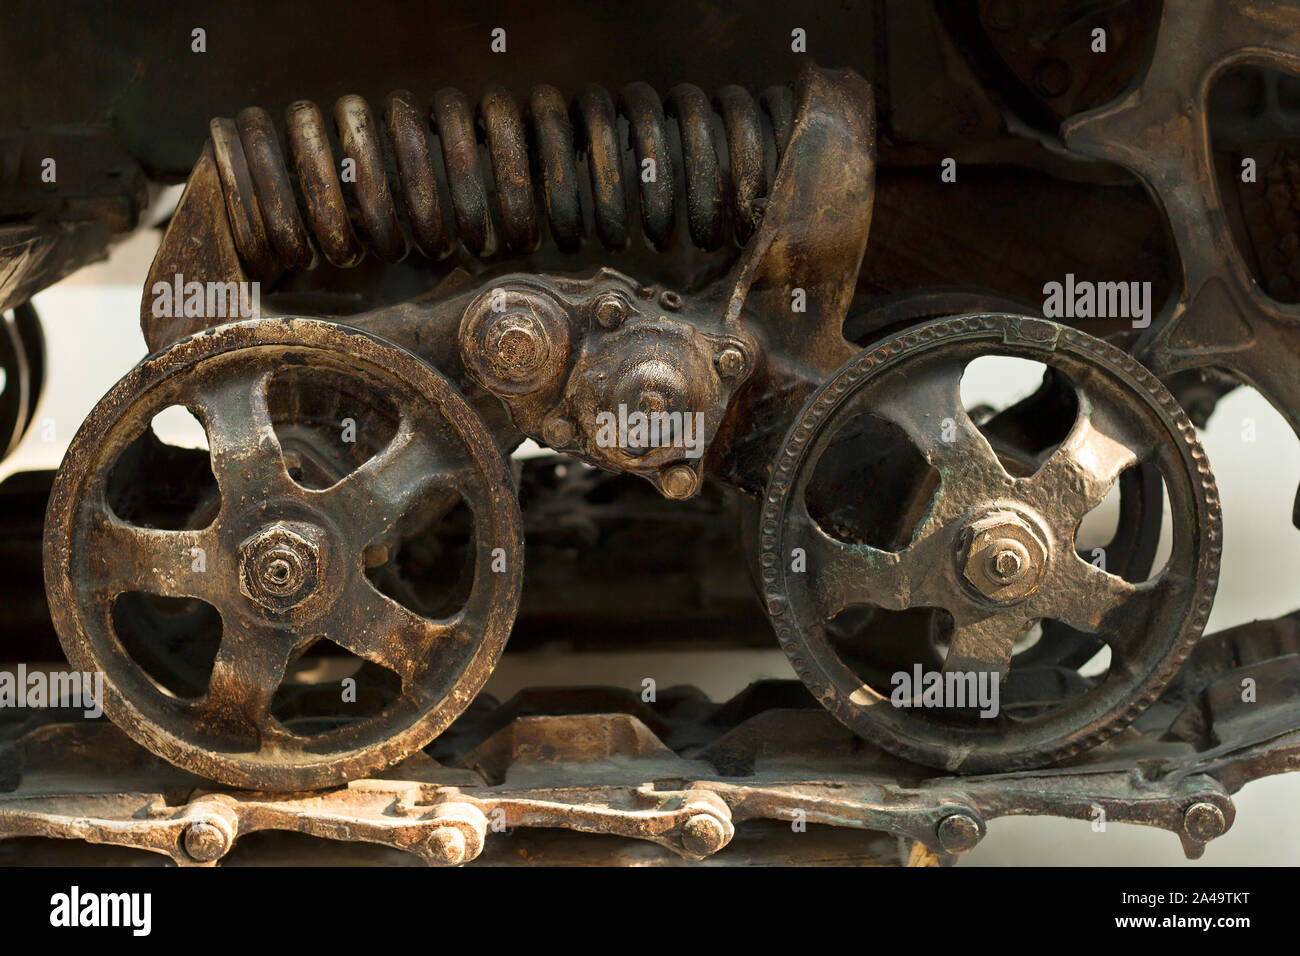 Details of the wheels and tracks of the tractor tracks. Close-up tractor protector with wheel. Vintage industrial background Stock Photo